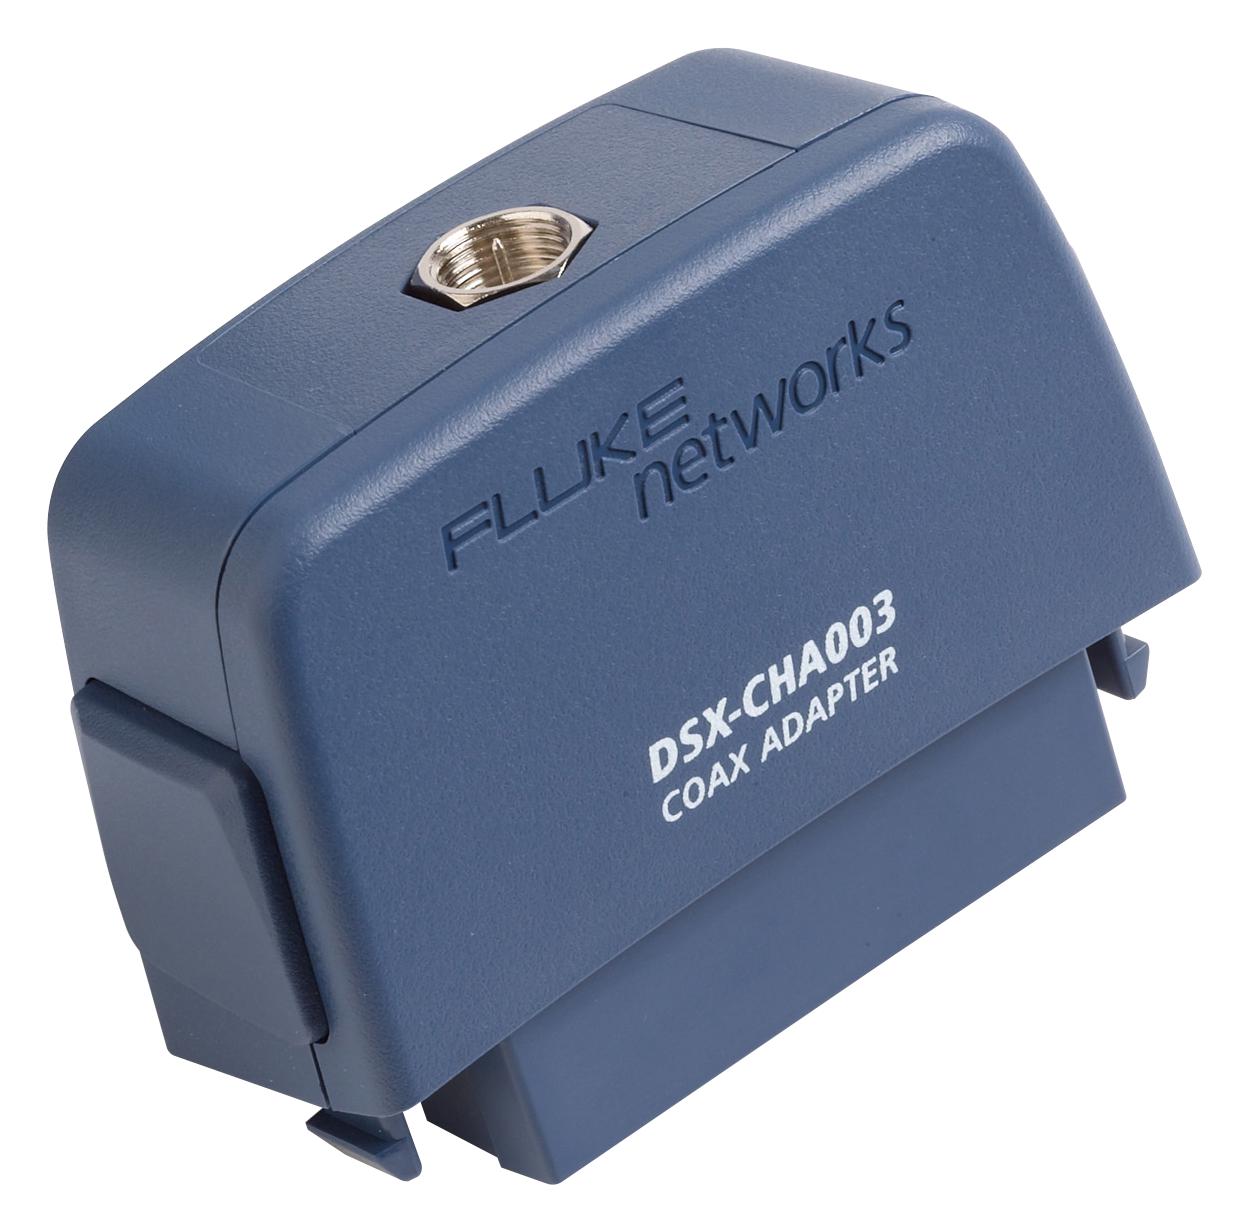 DSX-CHA003 COAXIAL CABLE ADAPTER, CABLEANALYZER FLUKE NETWORKS